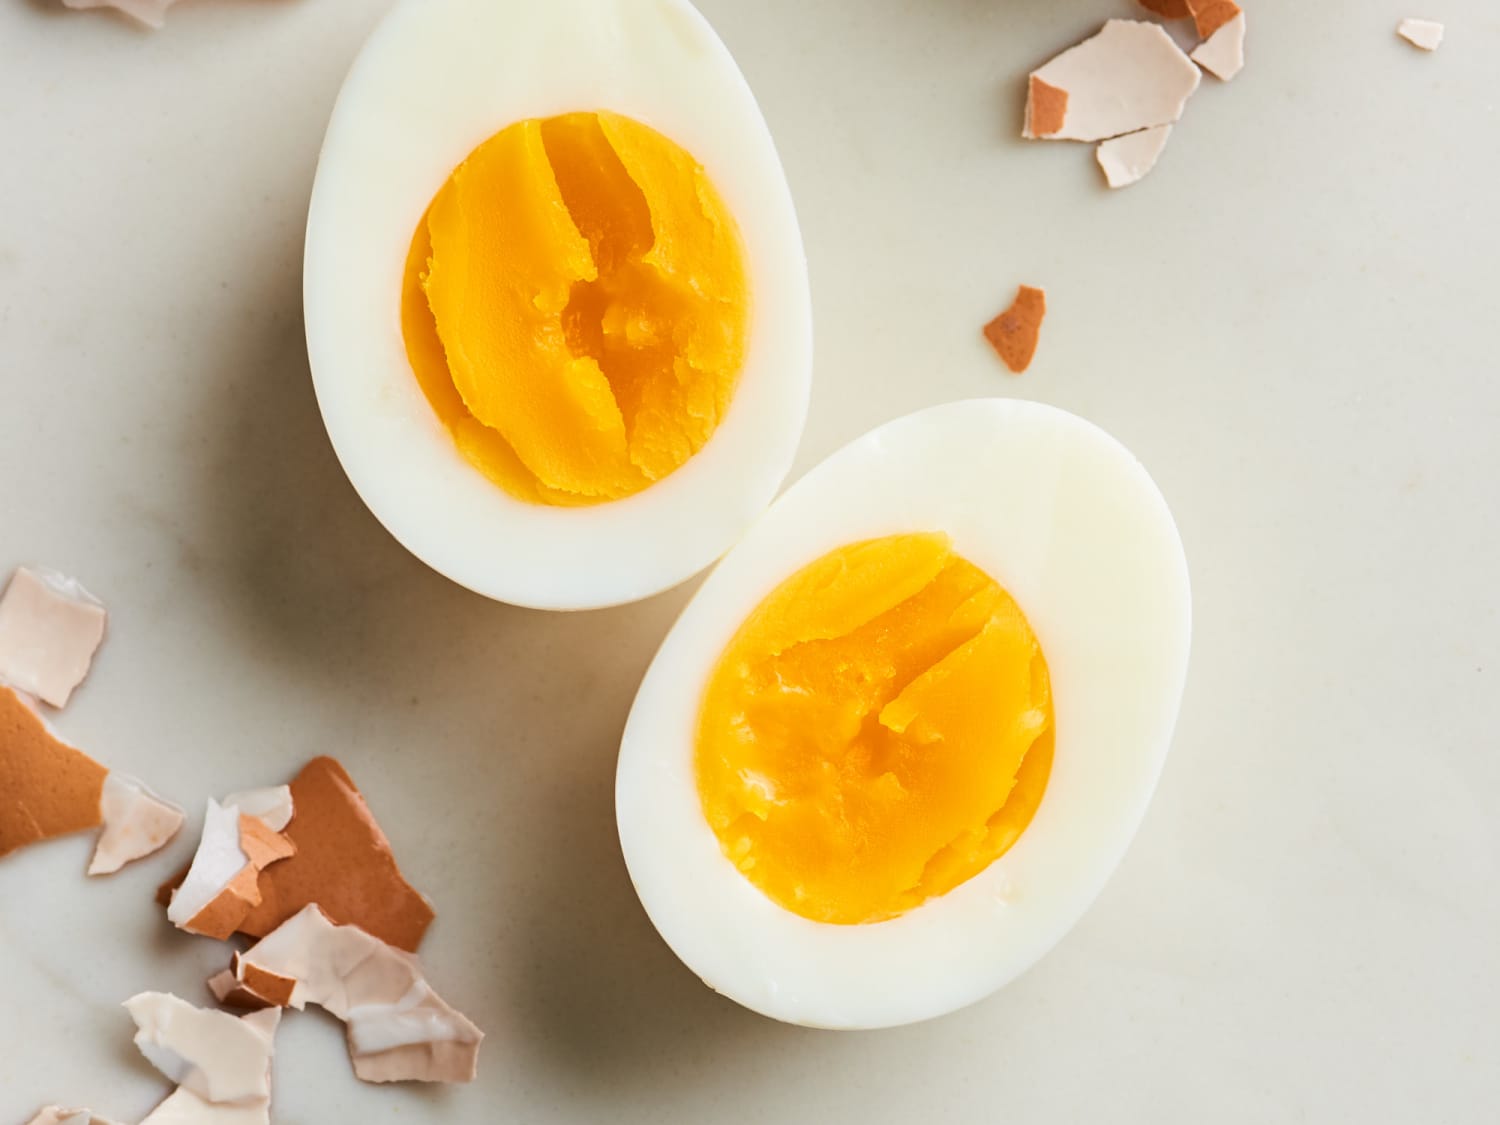 How To Boil Eggs Perfectly Every Time Kitchn